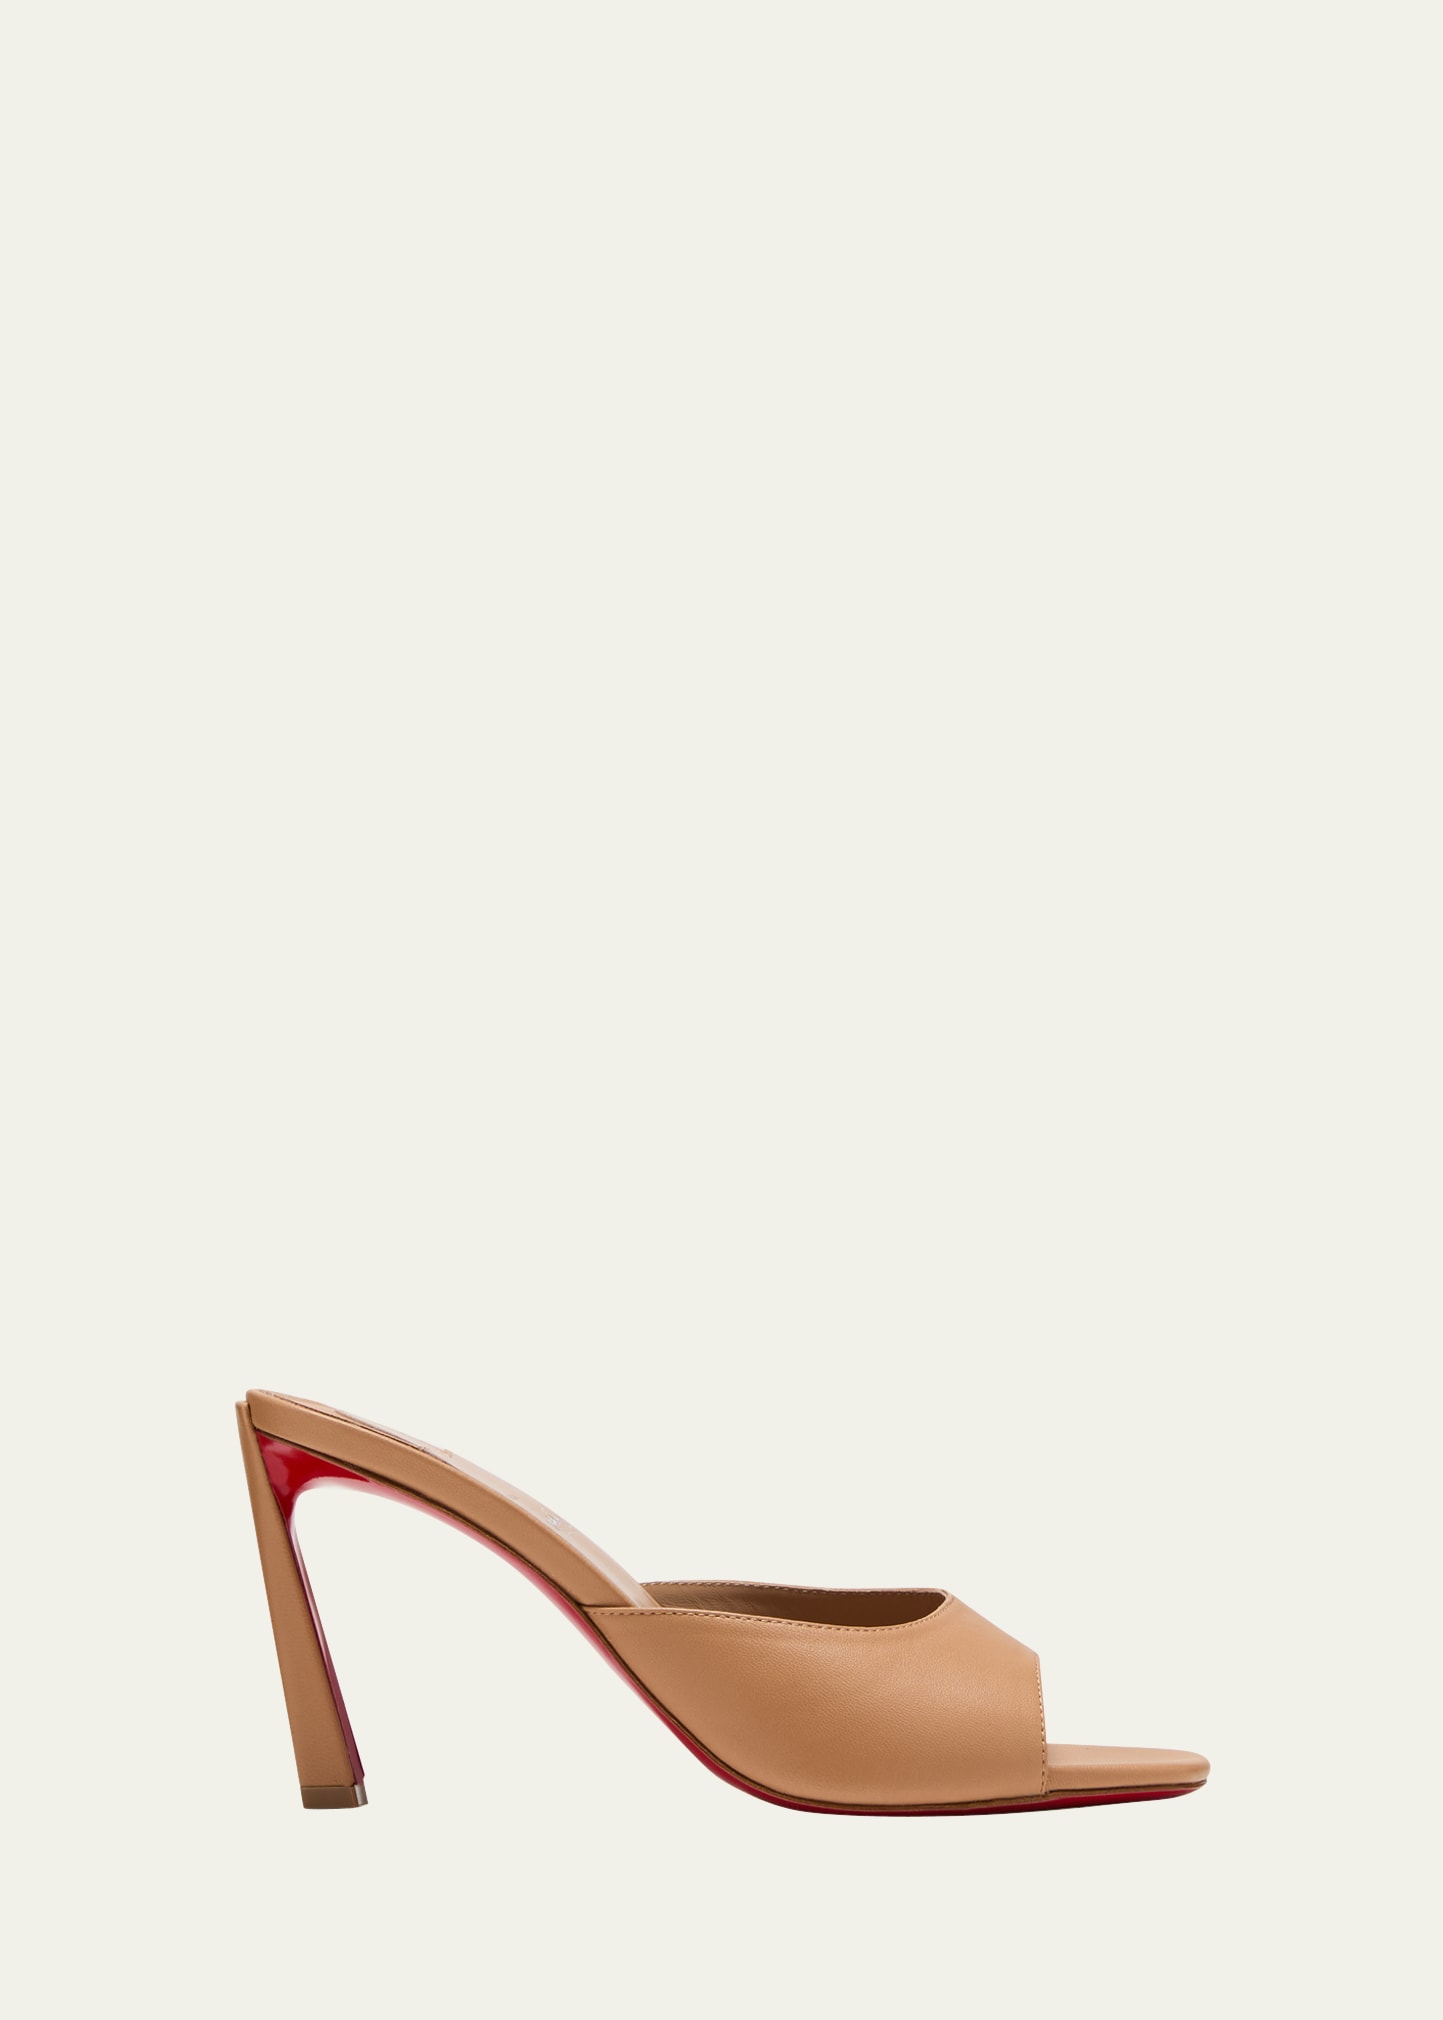 Condora Leather Red Sole Mule Sandals